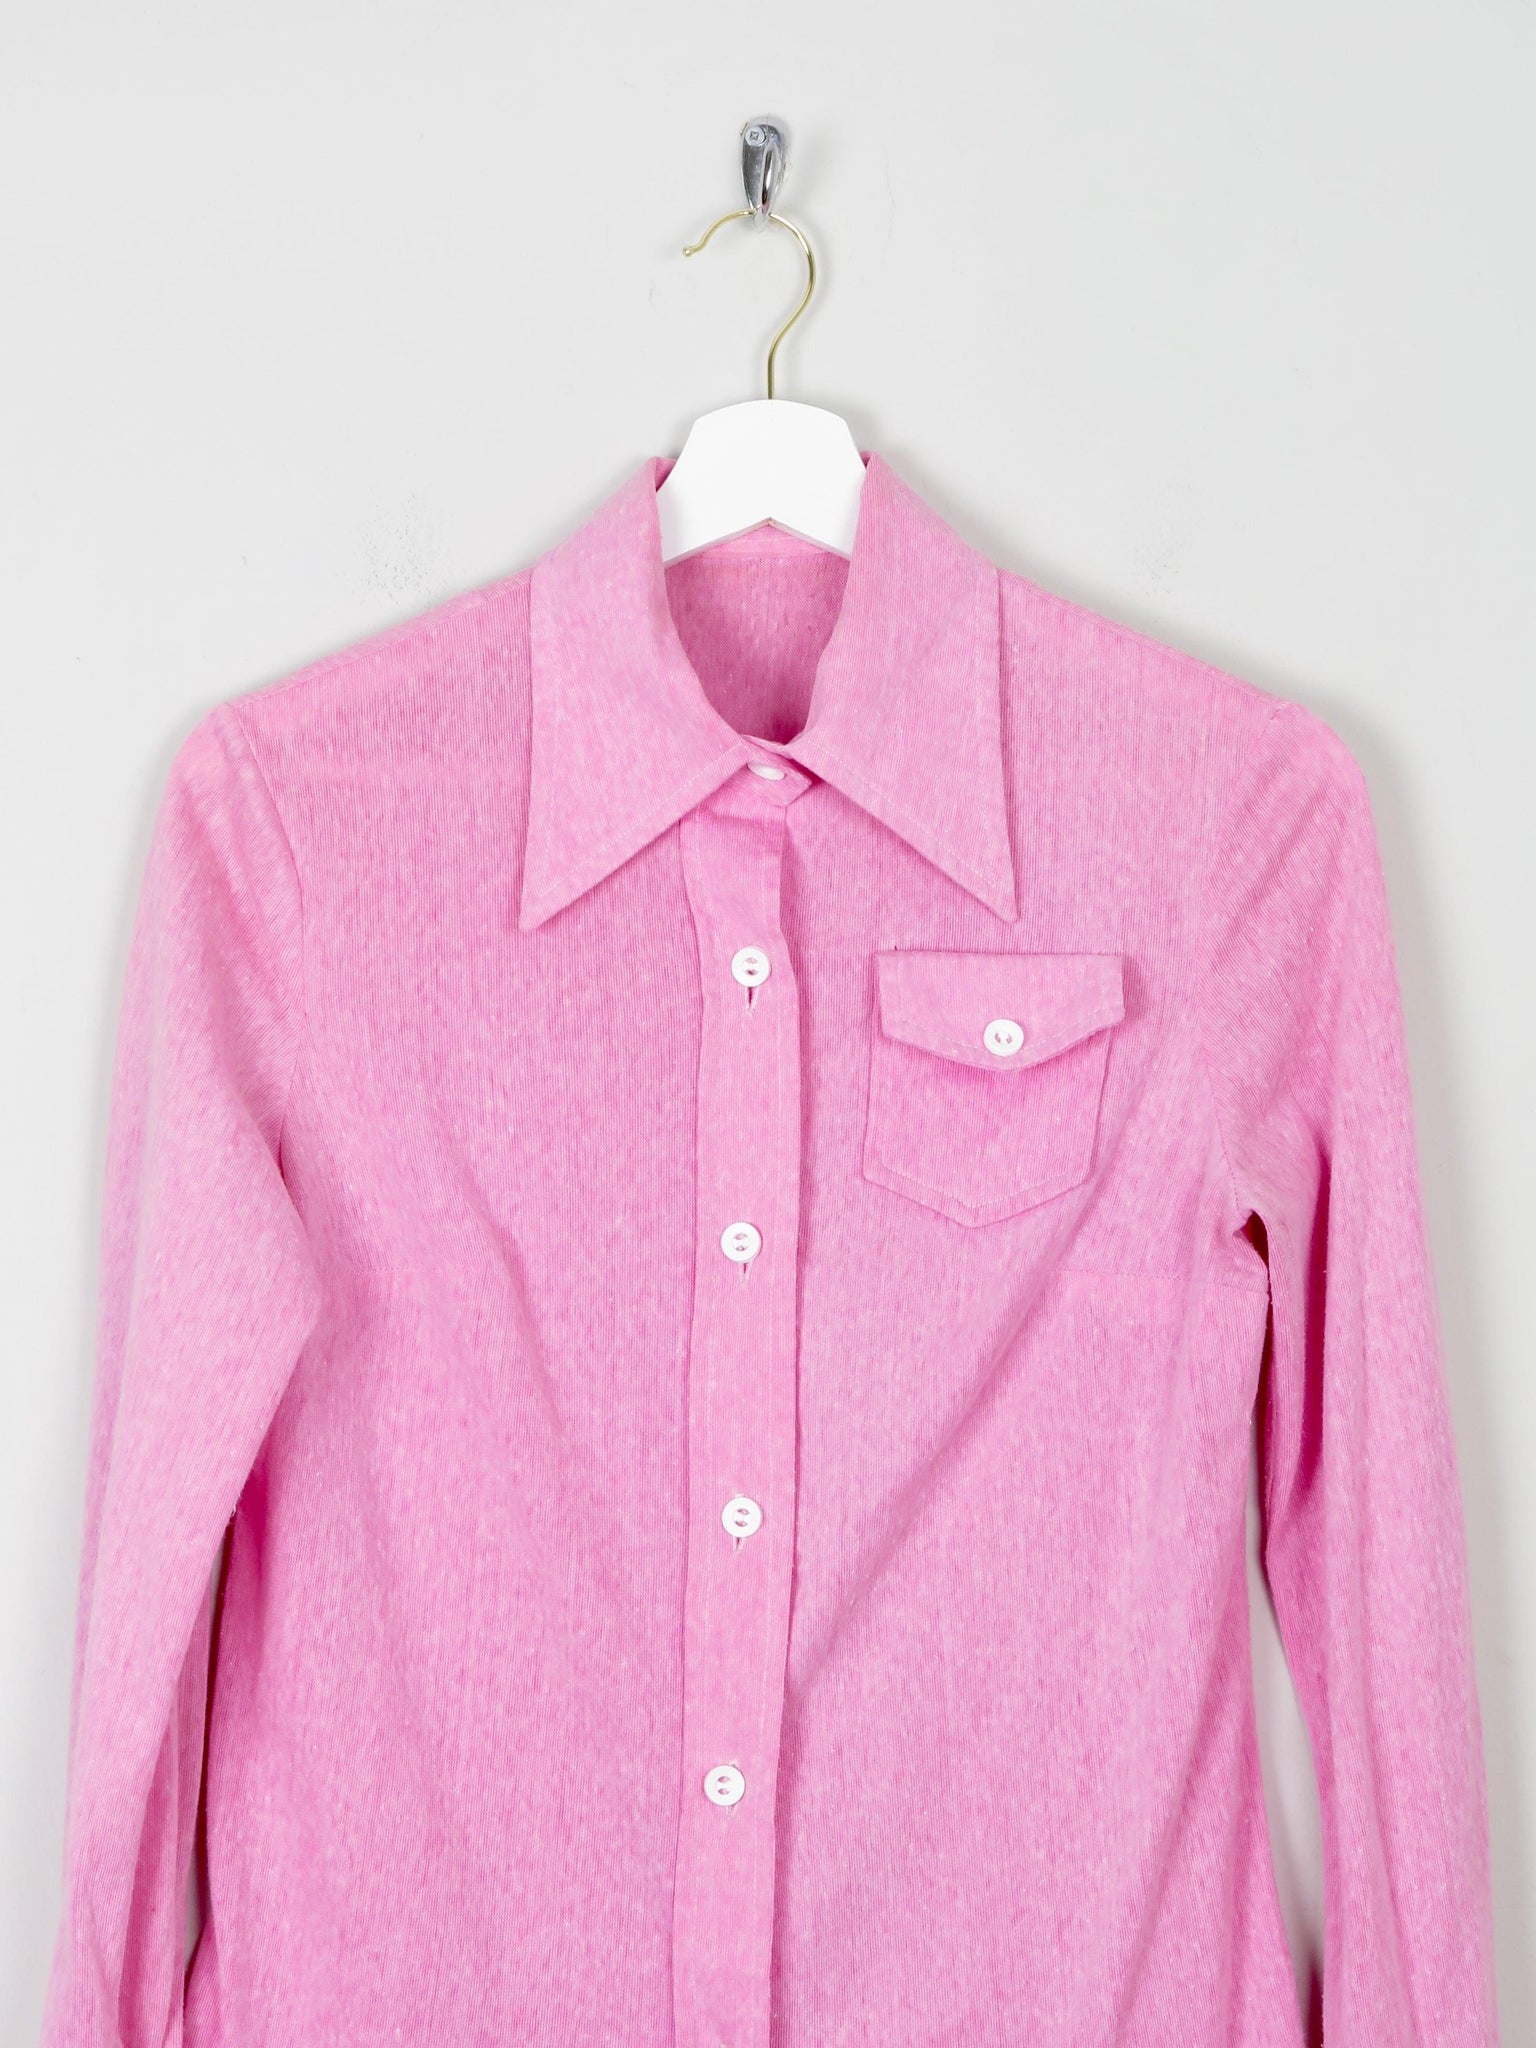 Women's 1970s Candy Pink Blouse With A Collar S - The Harlequin